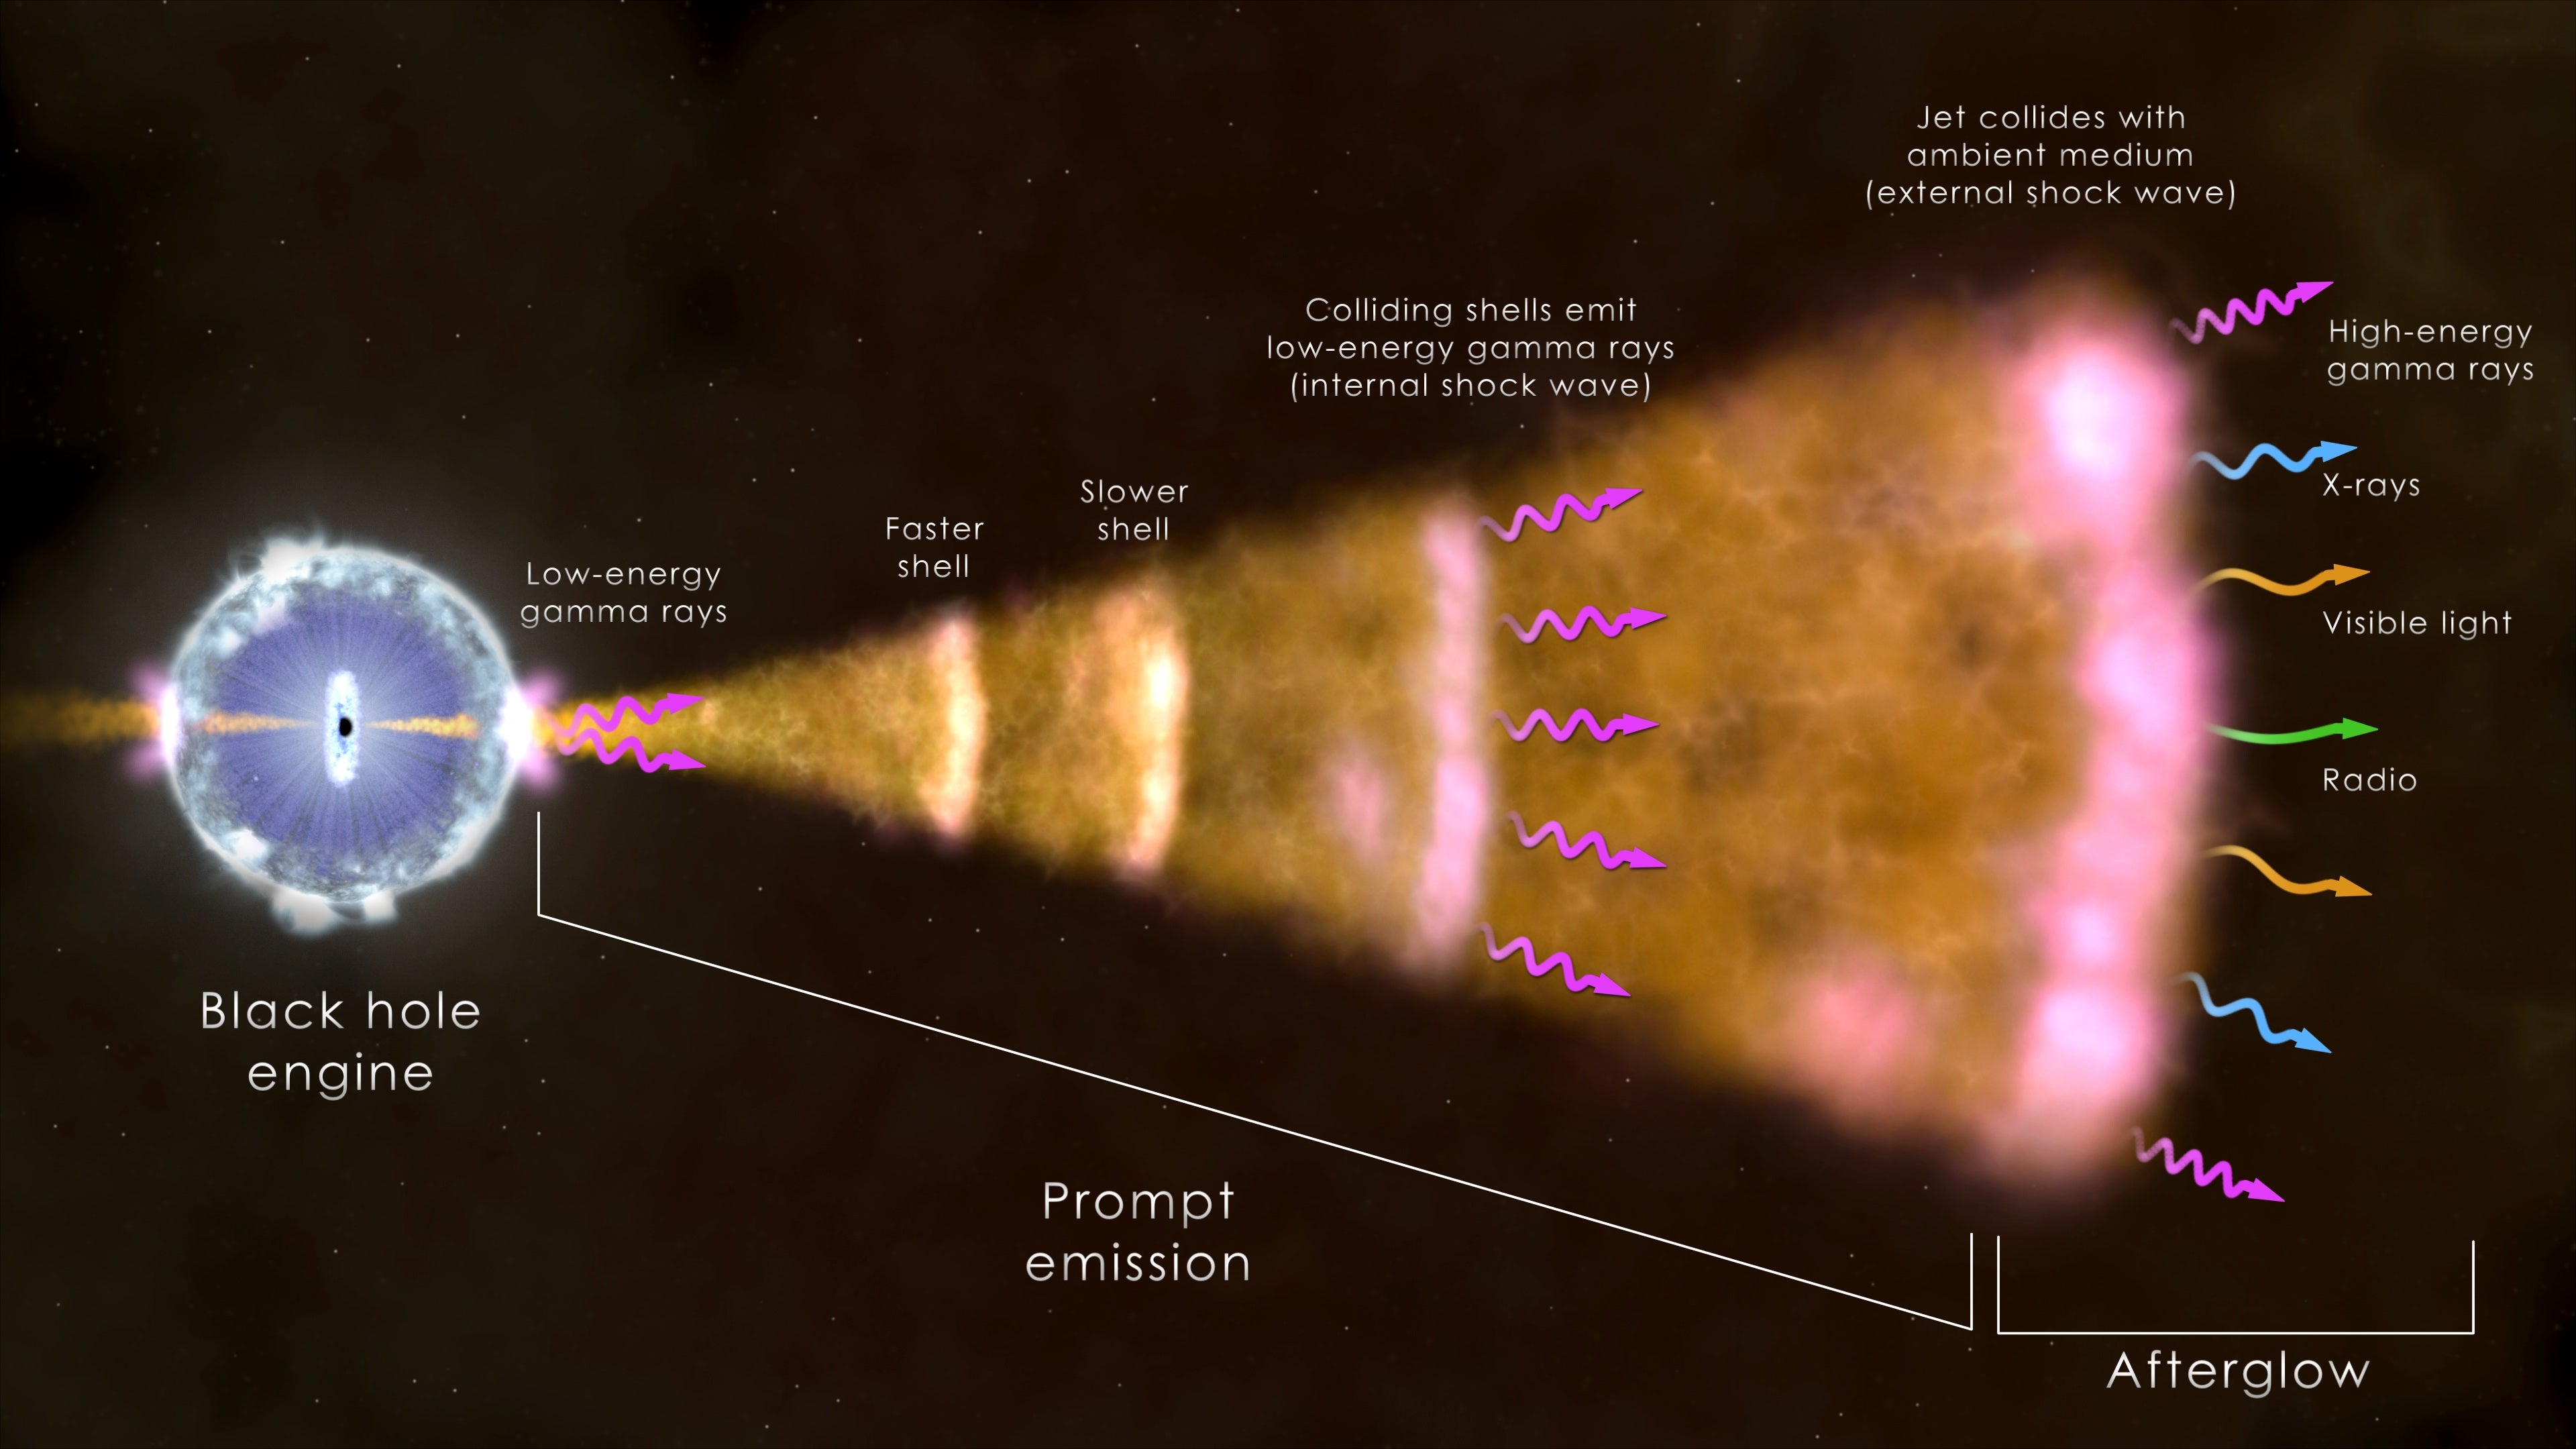 Jet Streaming From the Brightest Known Gamma Ray Burst Is Weirder Than We Realised